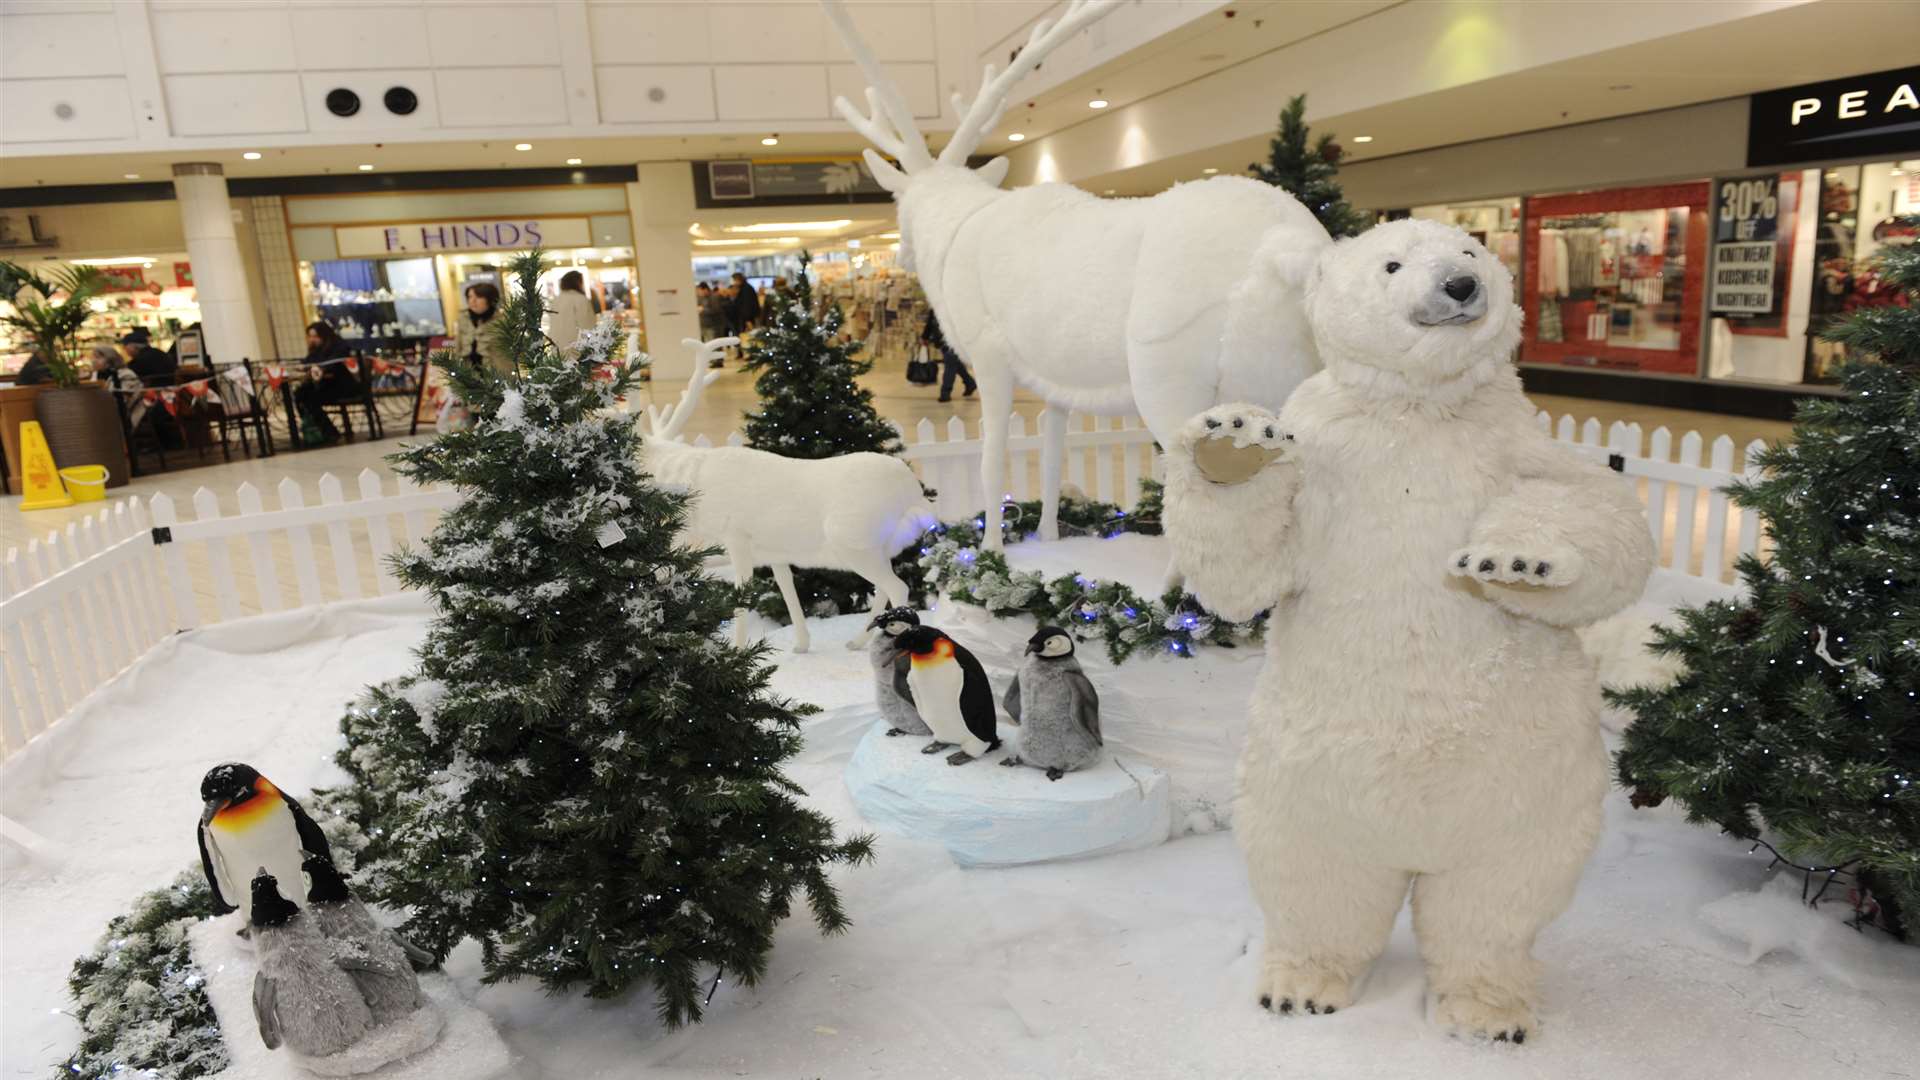 The Frozen themed festive display features both penguins and a polar bear